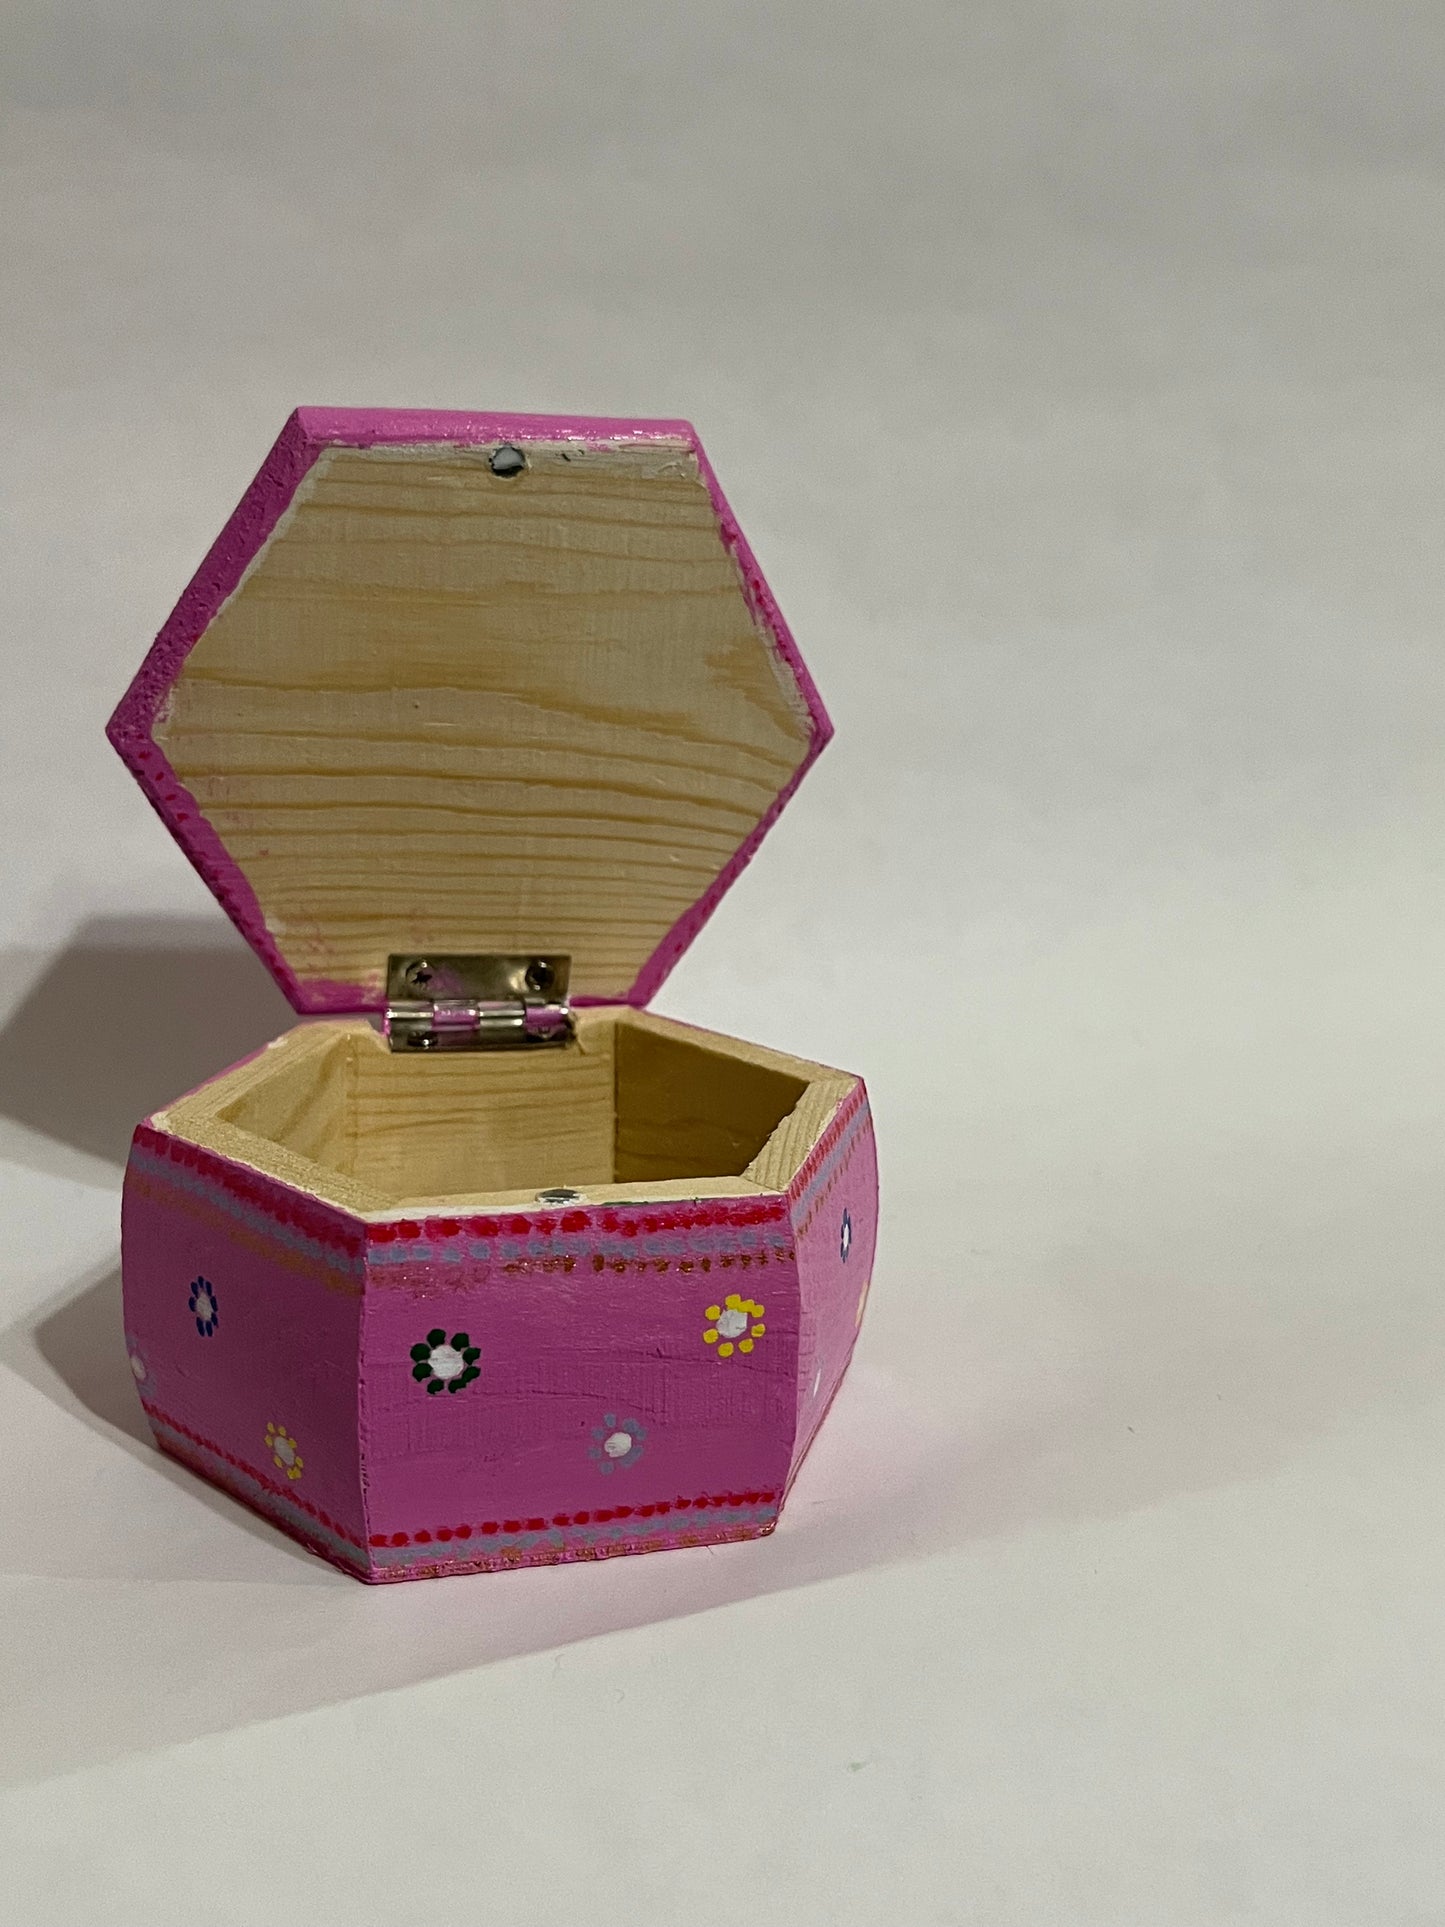 A jewel top hexagon wooden box painted with love!